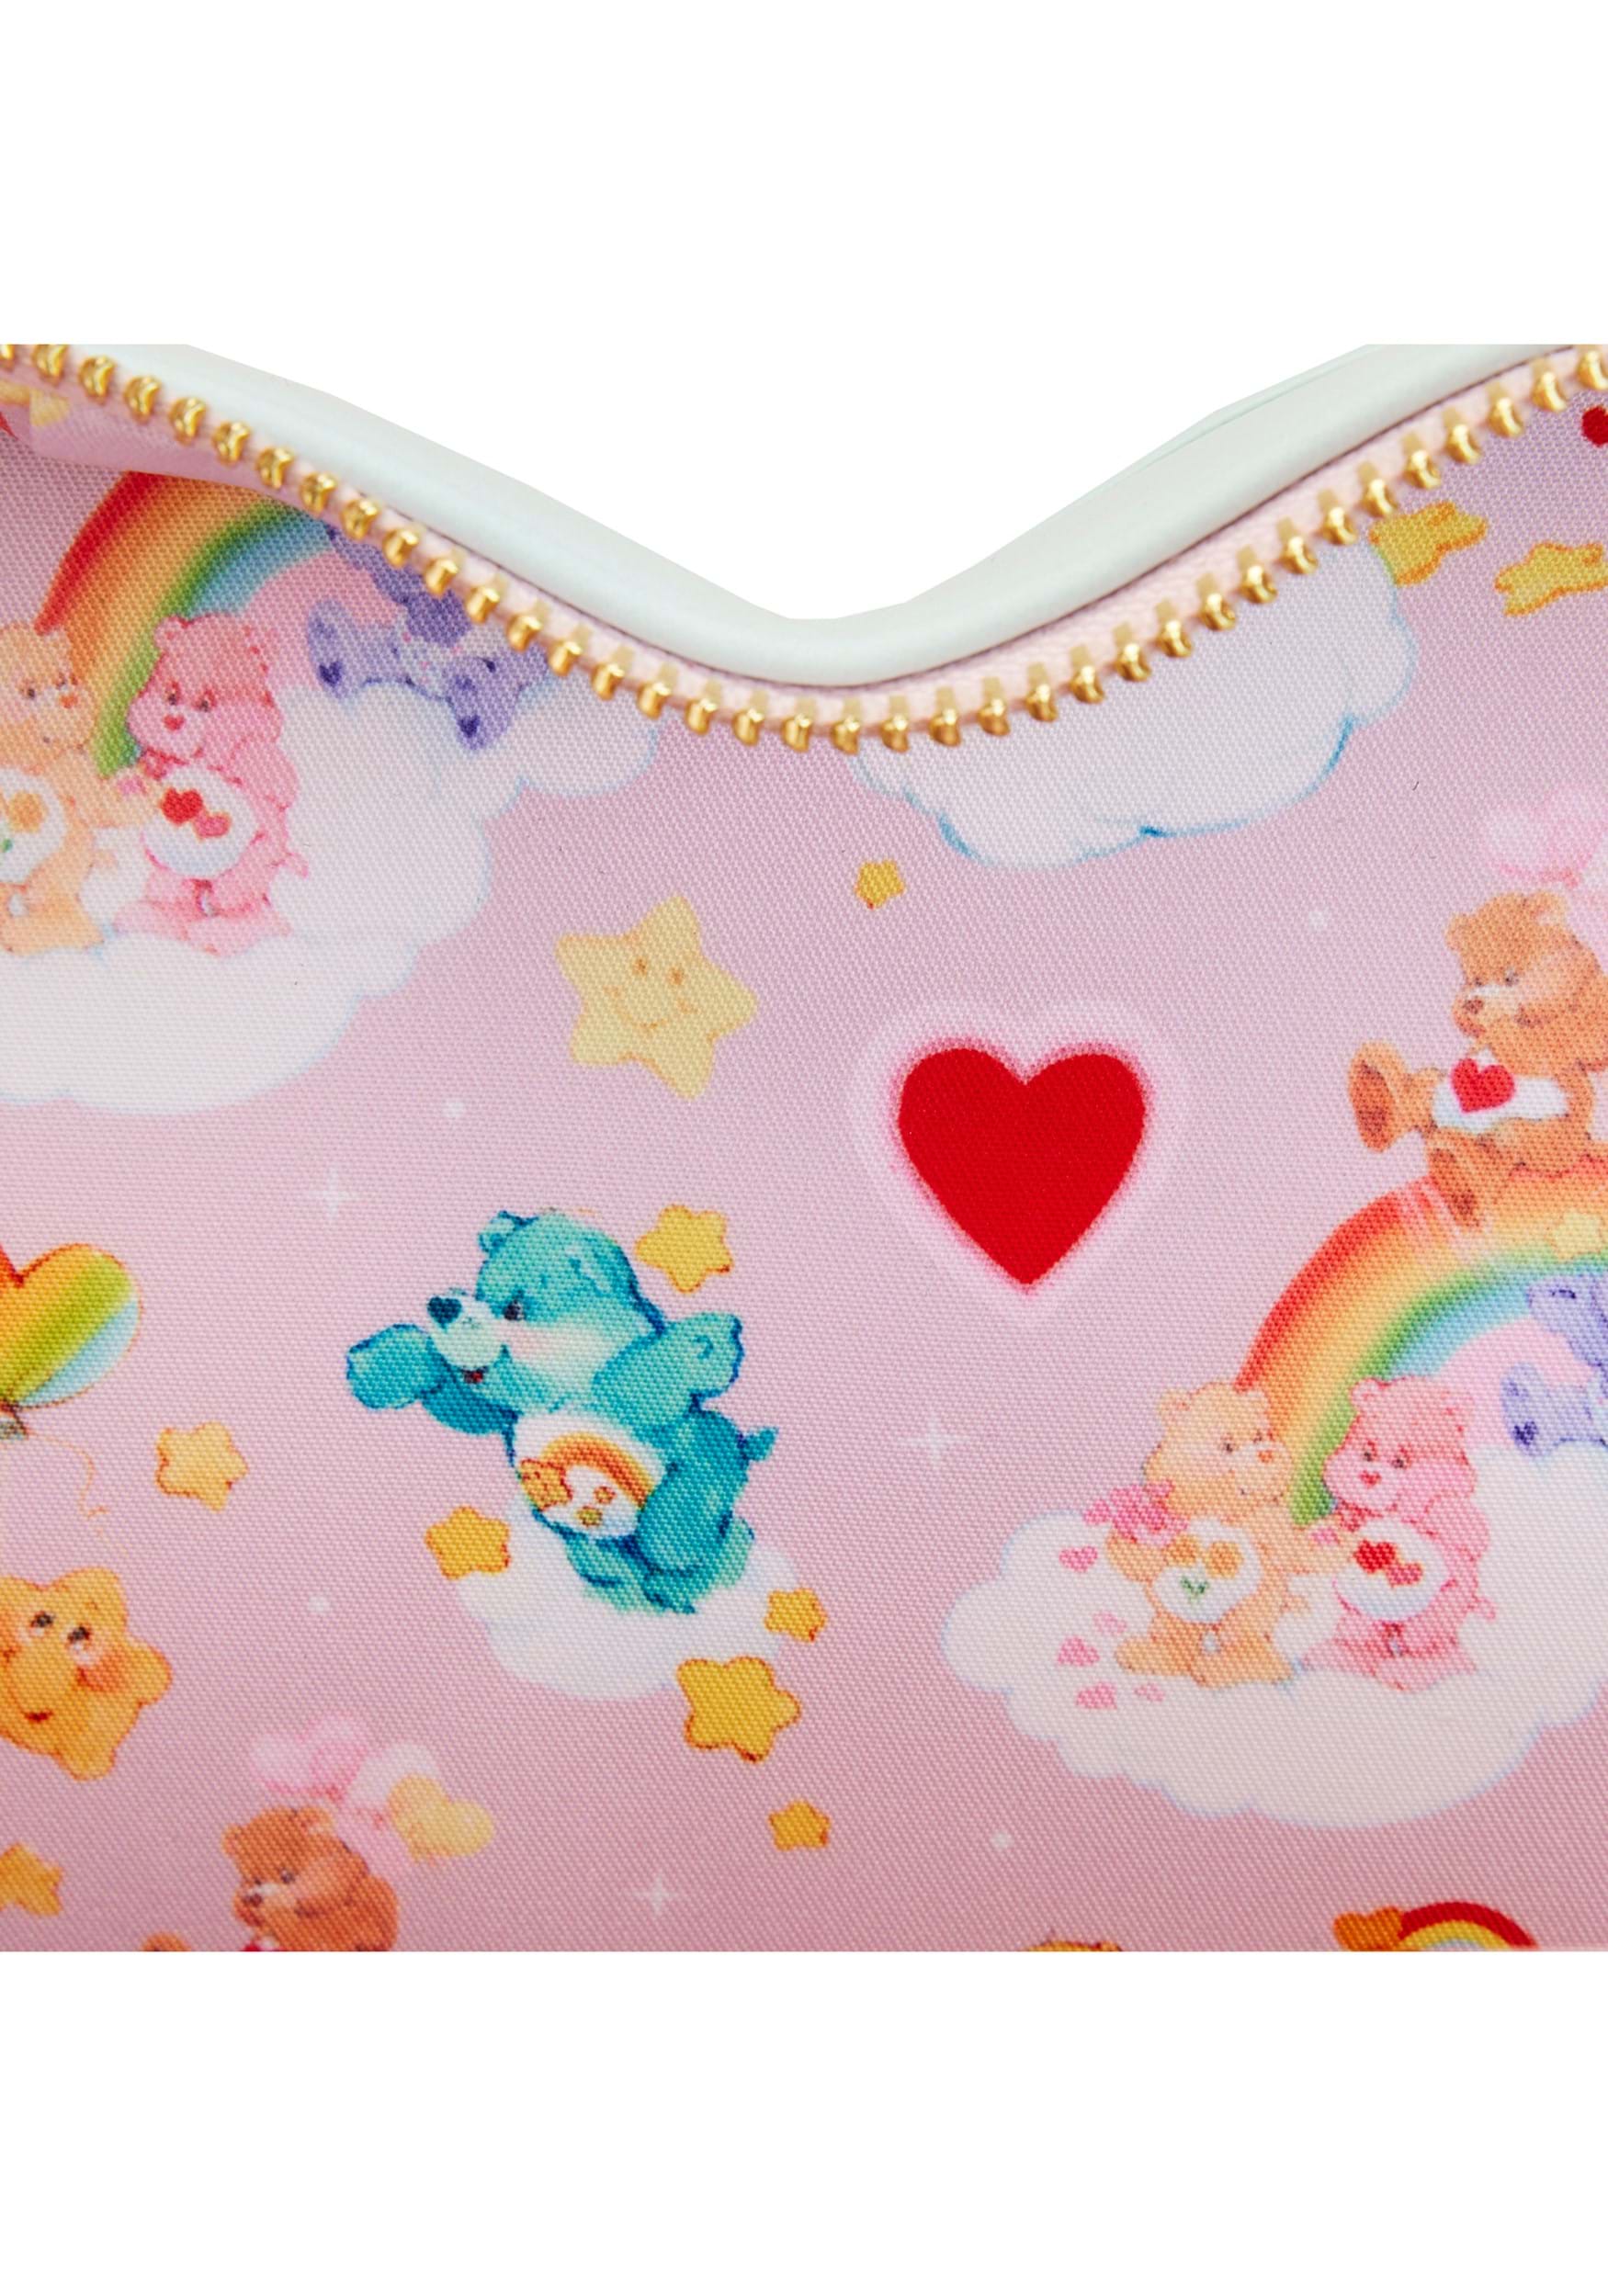 Loungefly Care Bears Heart Cloud Party Crossbody Bag With Rainbow Strap